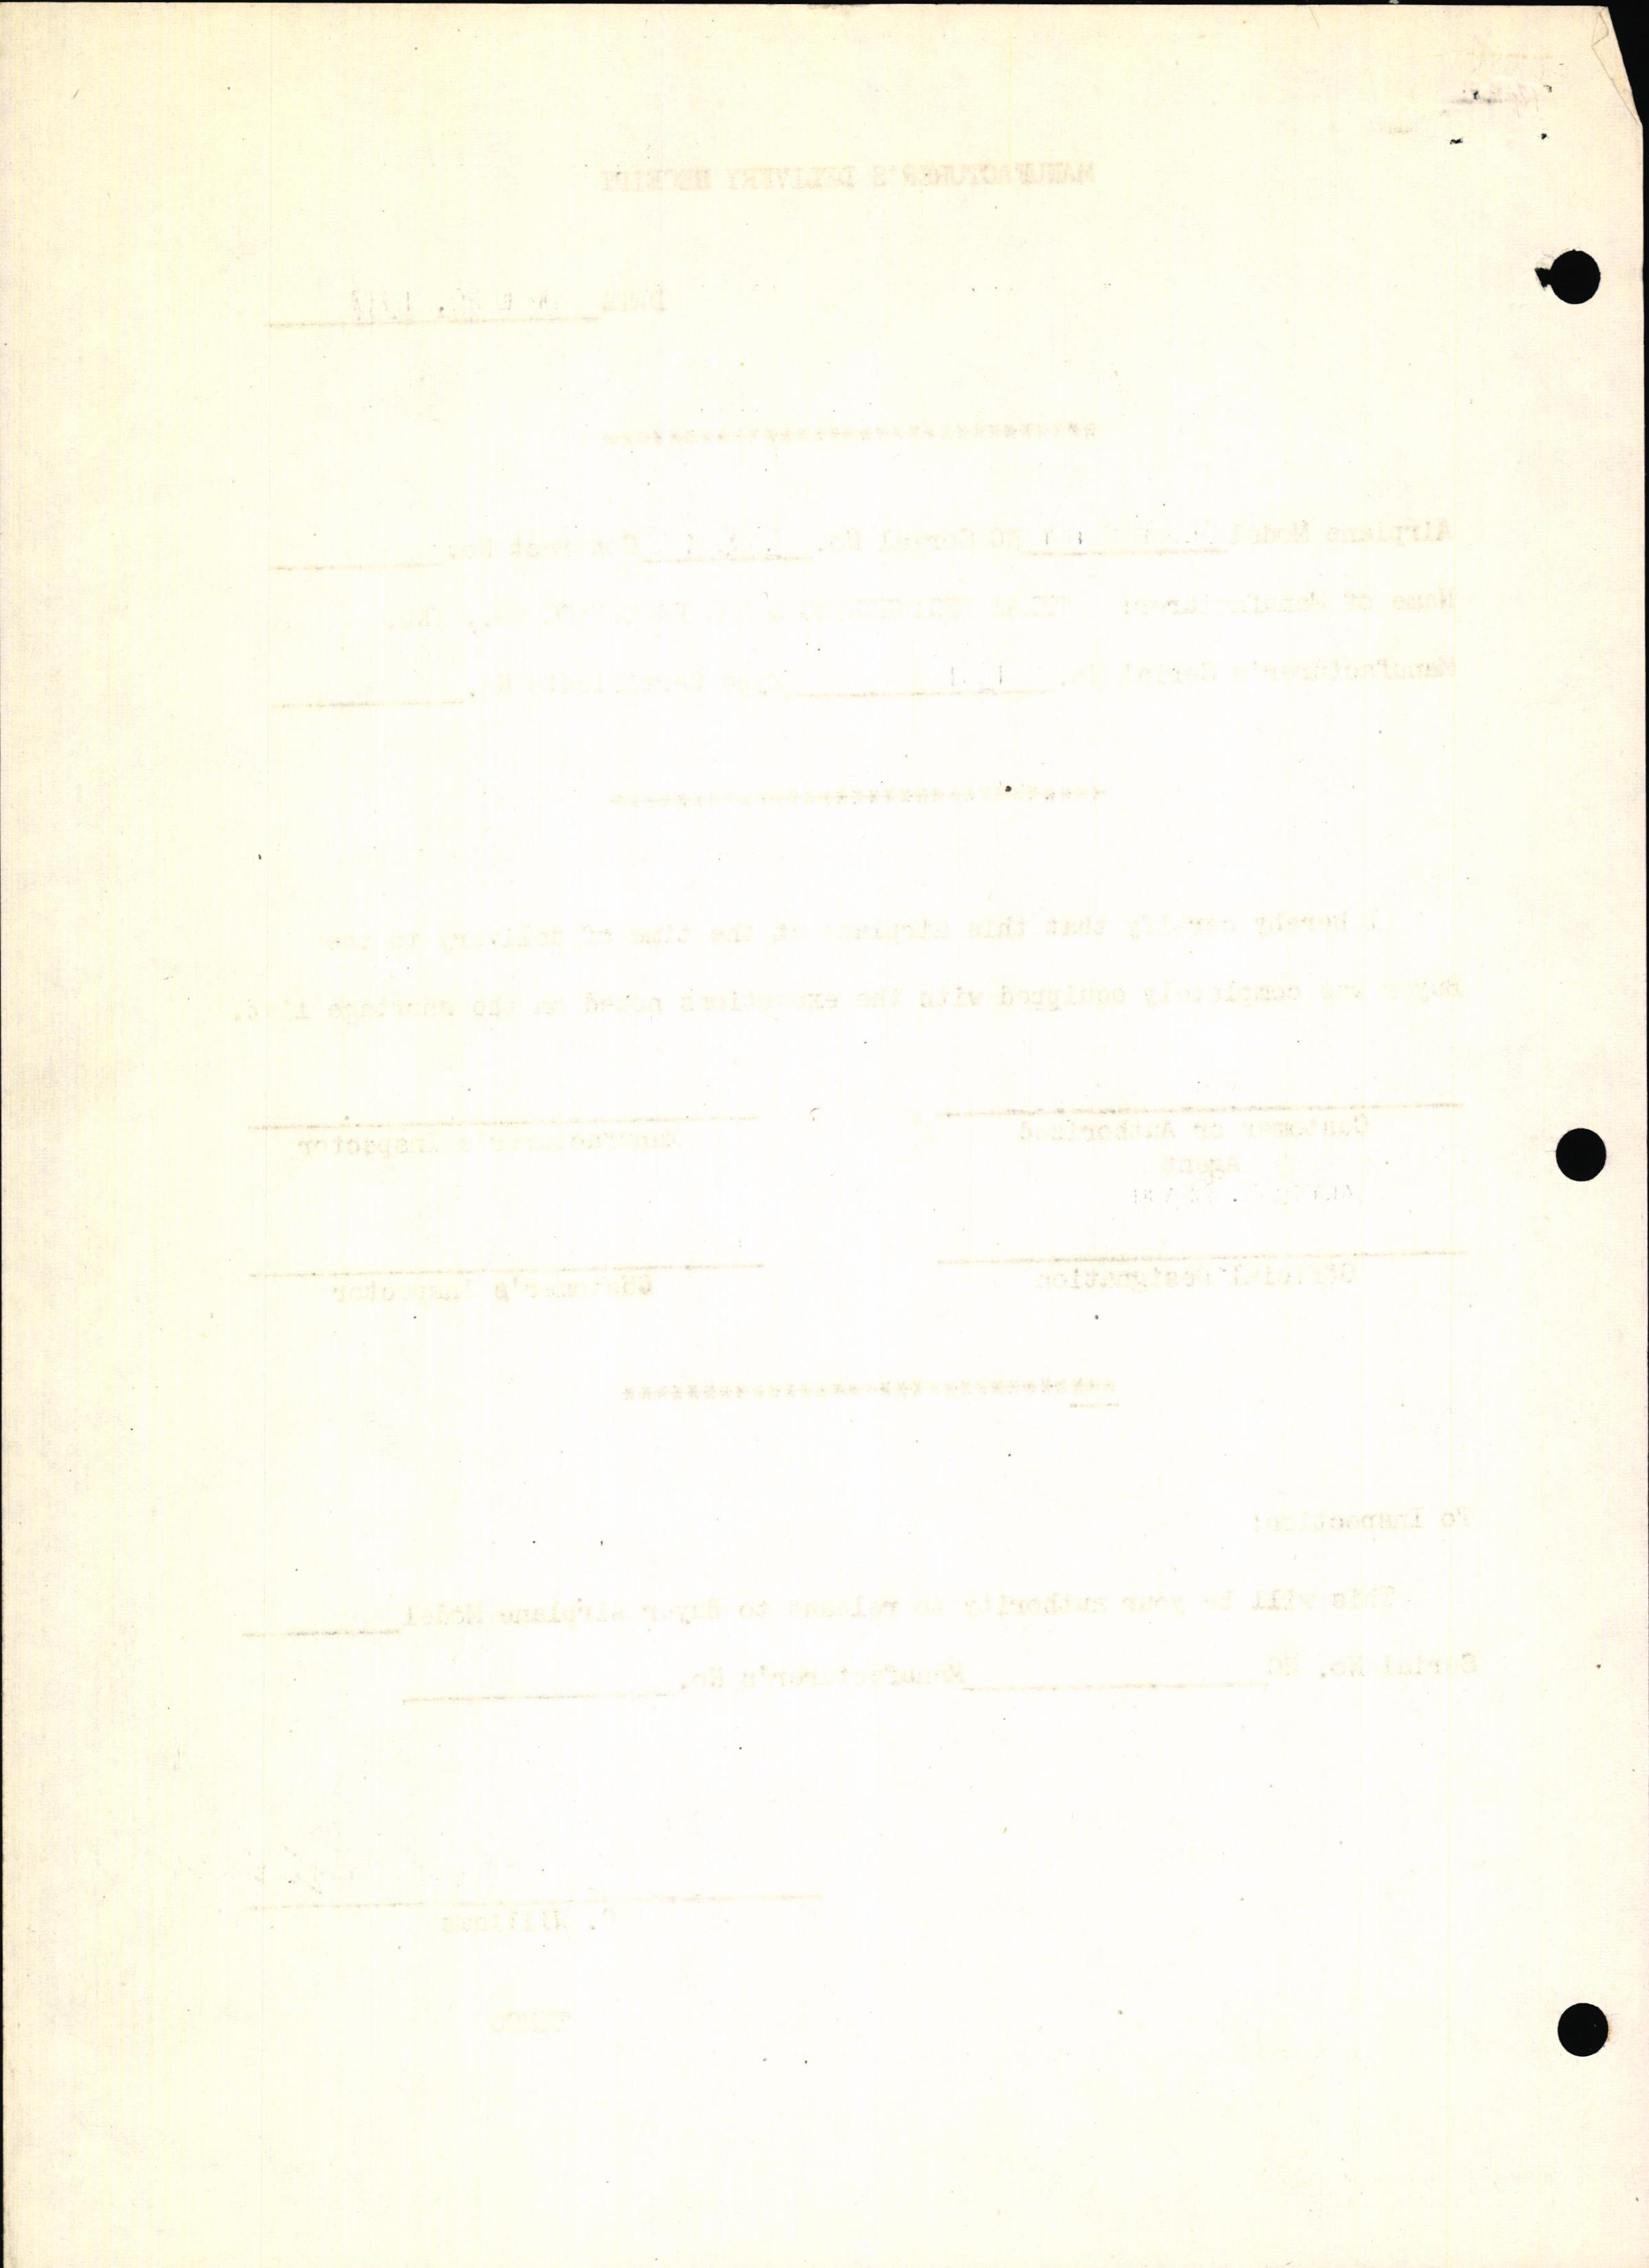 Sample page 6 from AirCorps Library document: Technical Information for Serial Number 1501